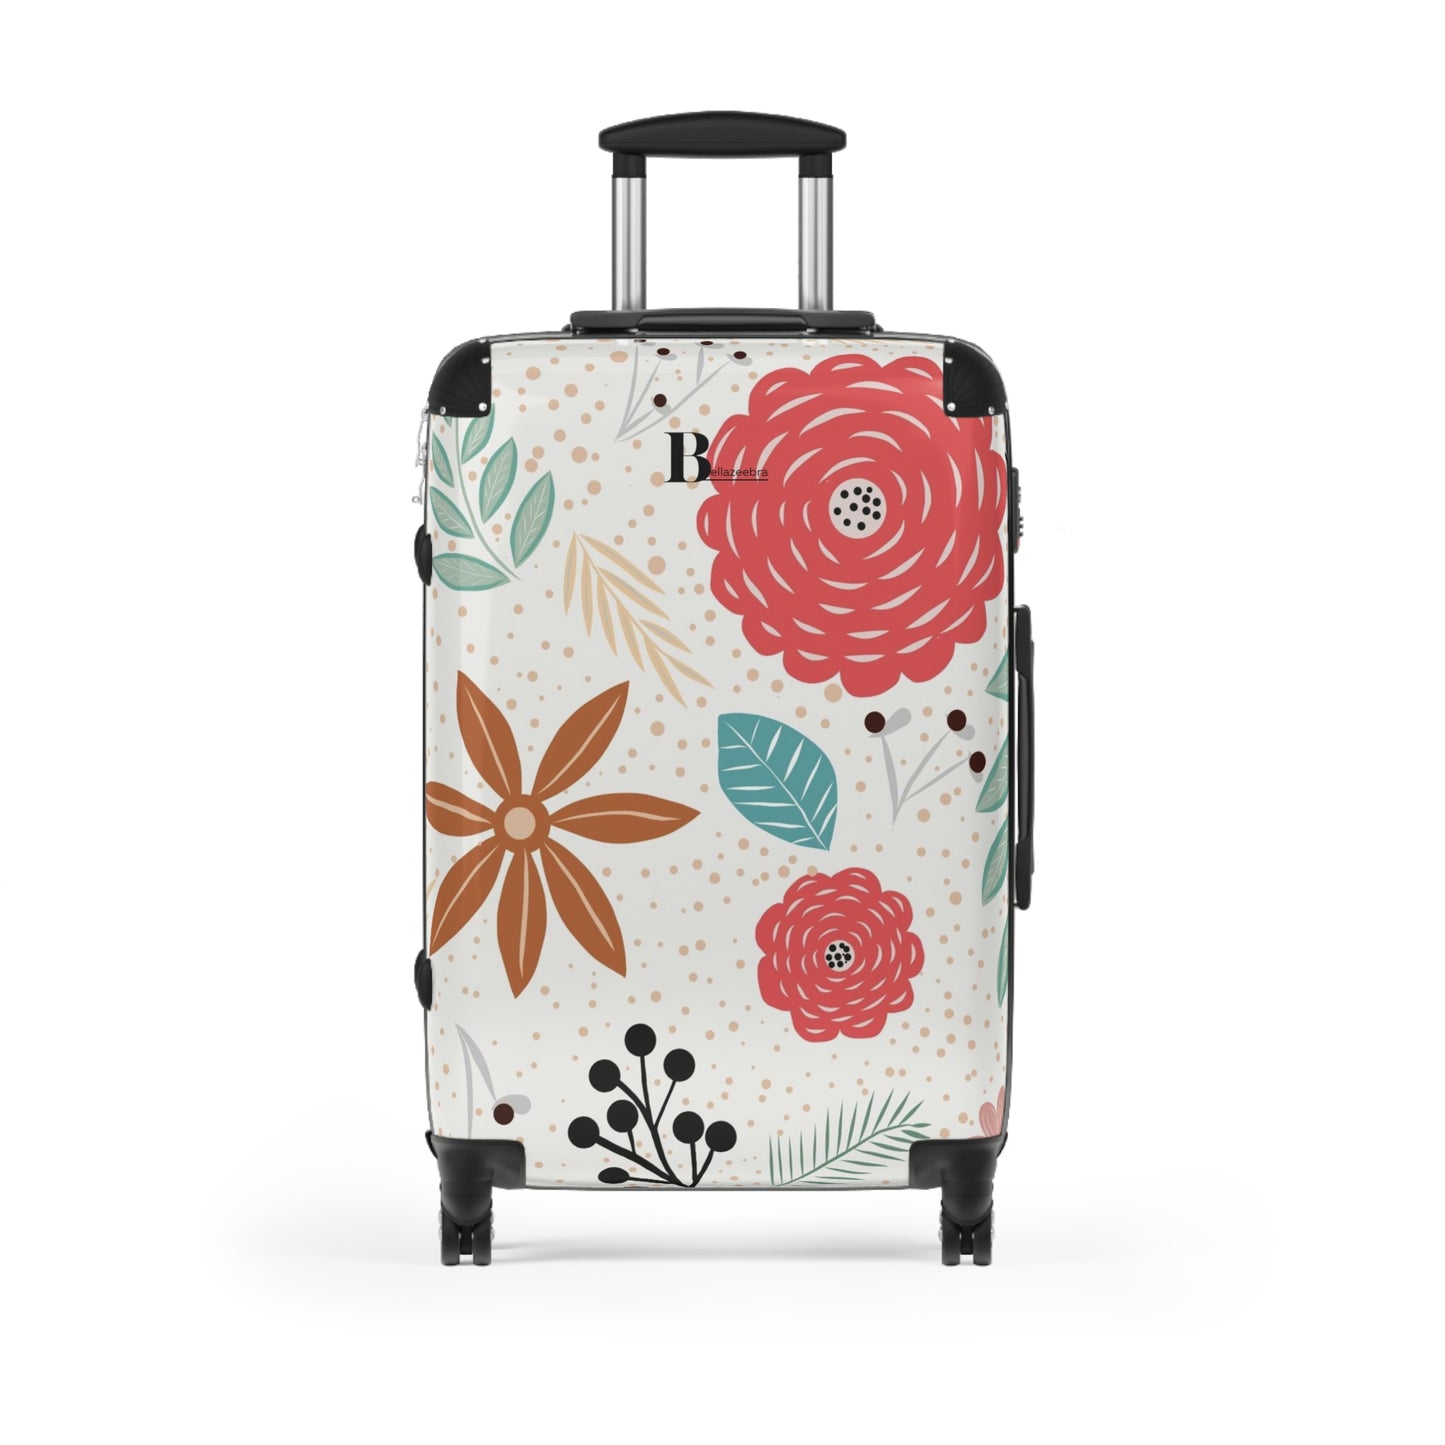 BELLAZEEBRA Customized hard-shell suitcases with whimsical flower prints on white background